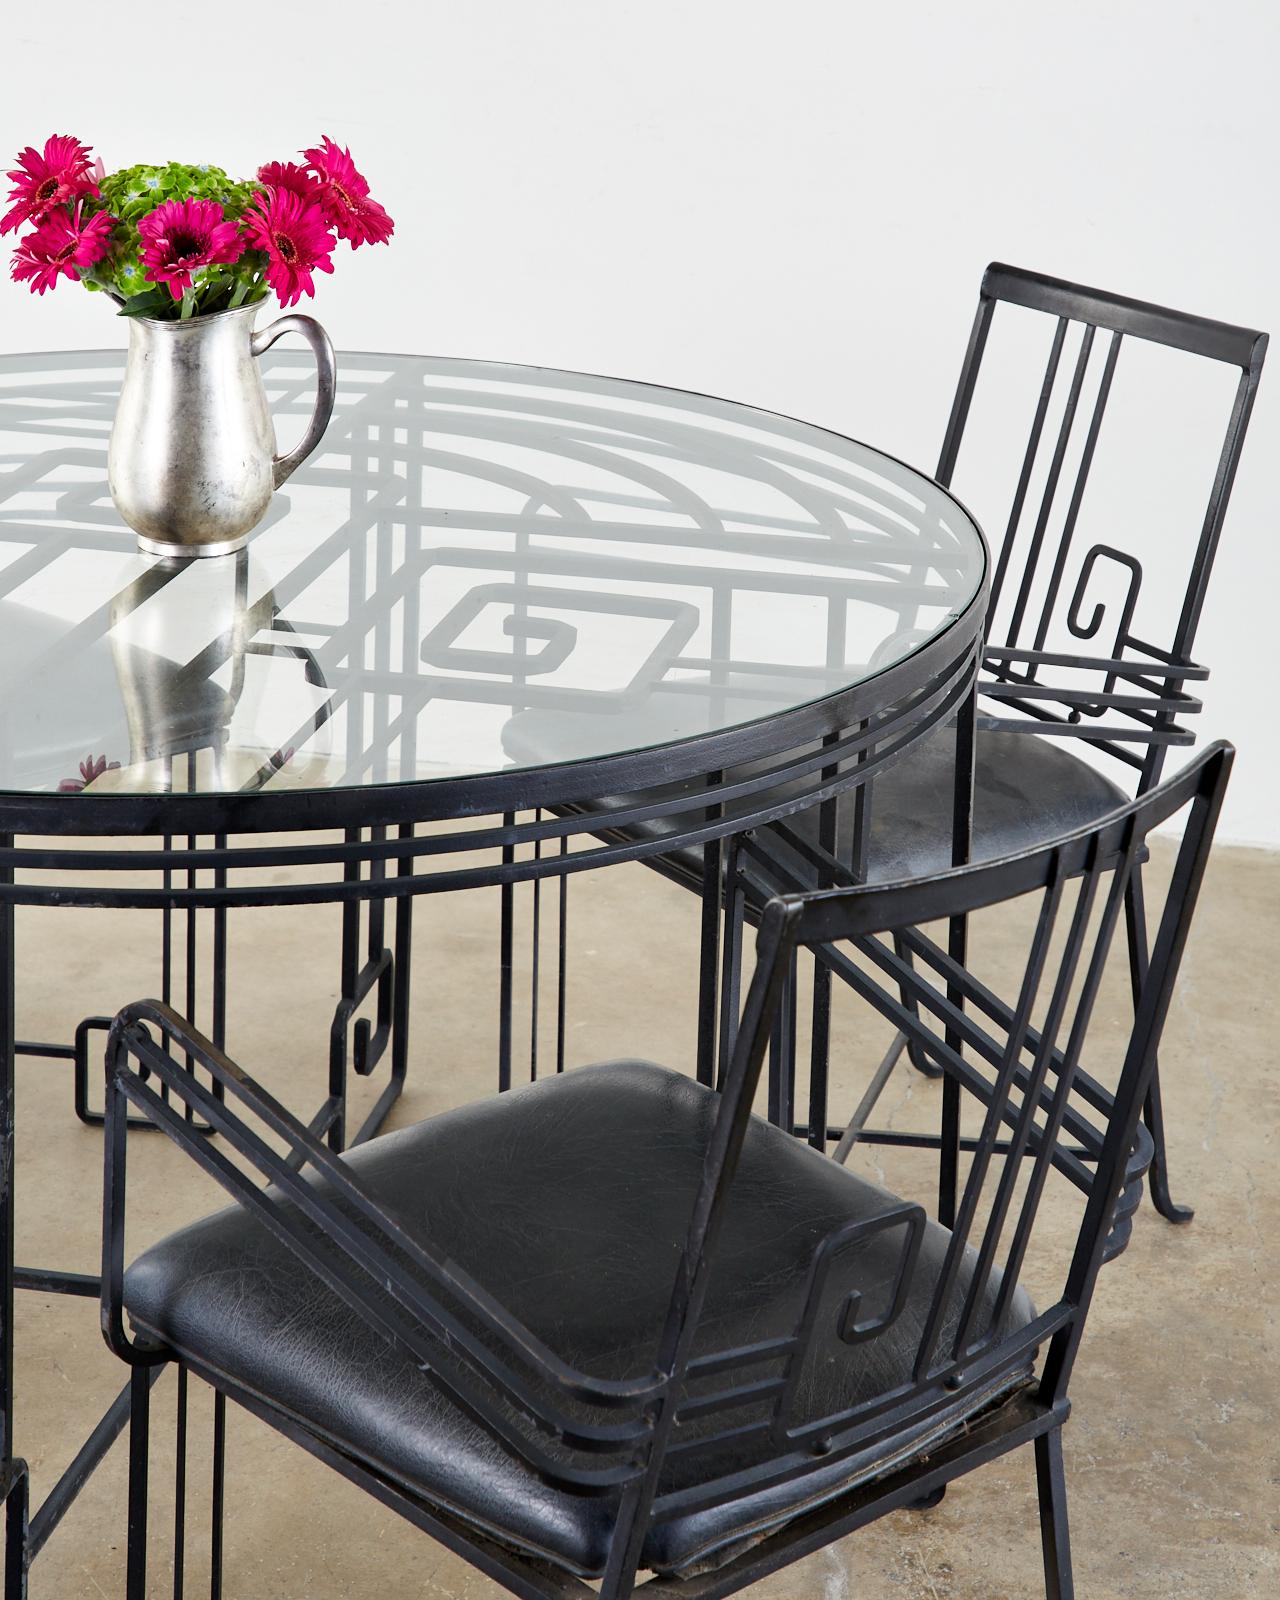 Whimsical set of four wrought iron garden or patio dining chairs. Crafted in the Art Deco taste featuring large neoclassical Greek key motifs on the back splat and feet. Reminiscent of John Salterini's Mid-Century Modern designs of iron furniture